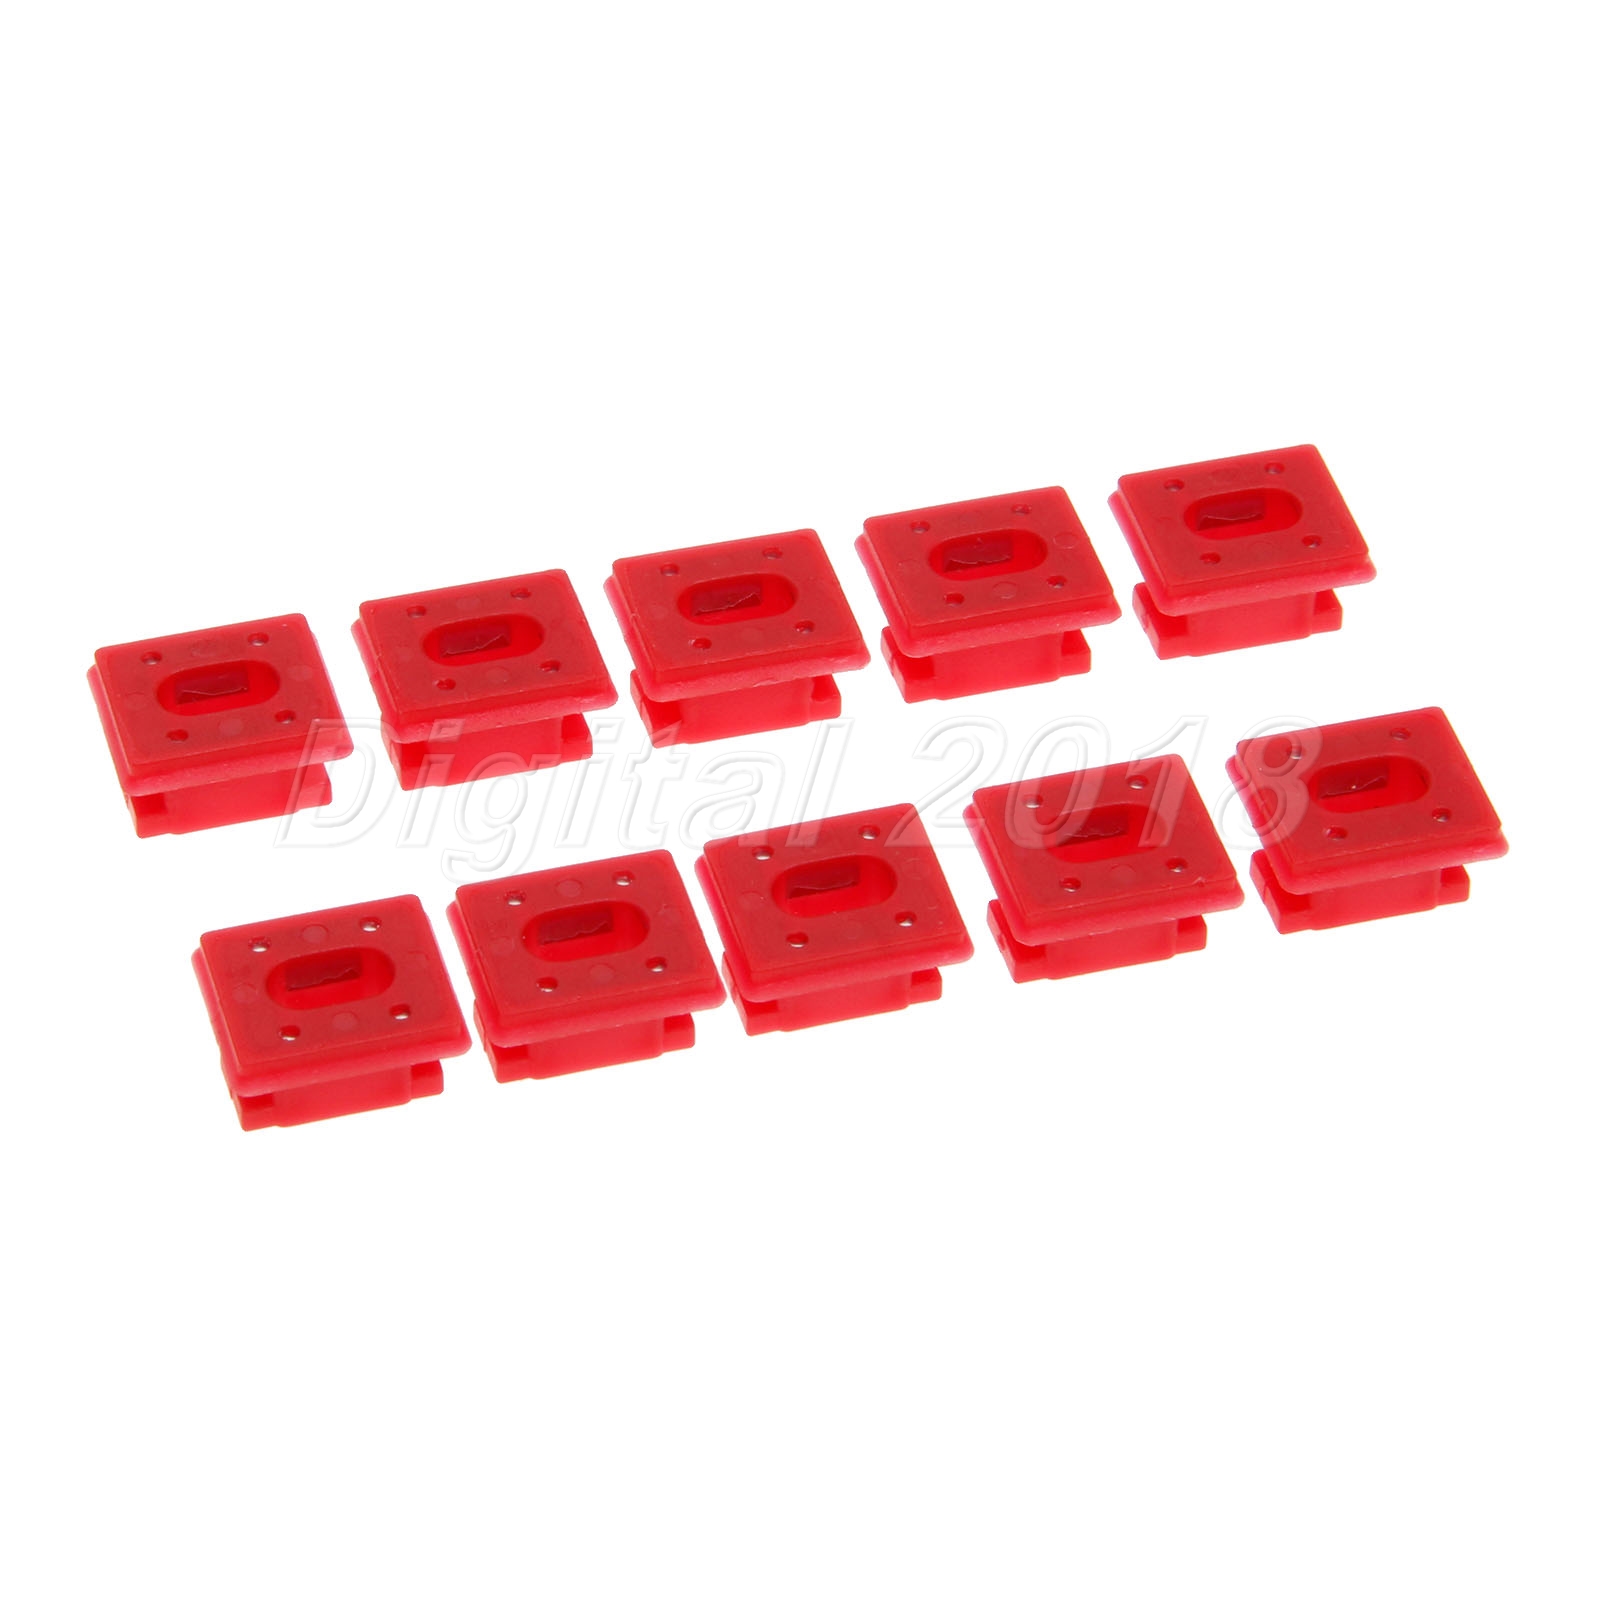 10x Car Clips Dashboard Trim Inserts Grommets Fit for E46 3 E65 7 ...